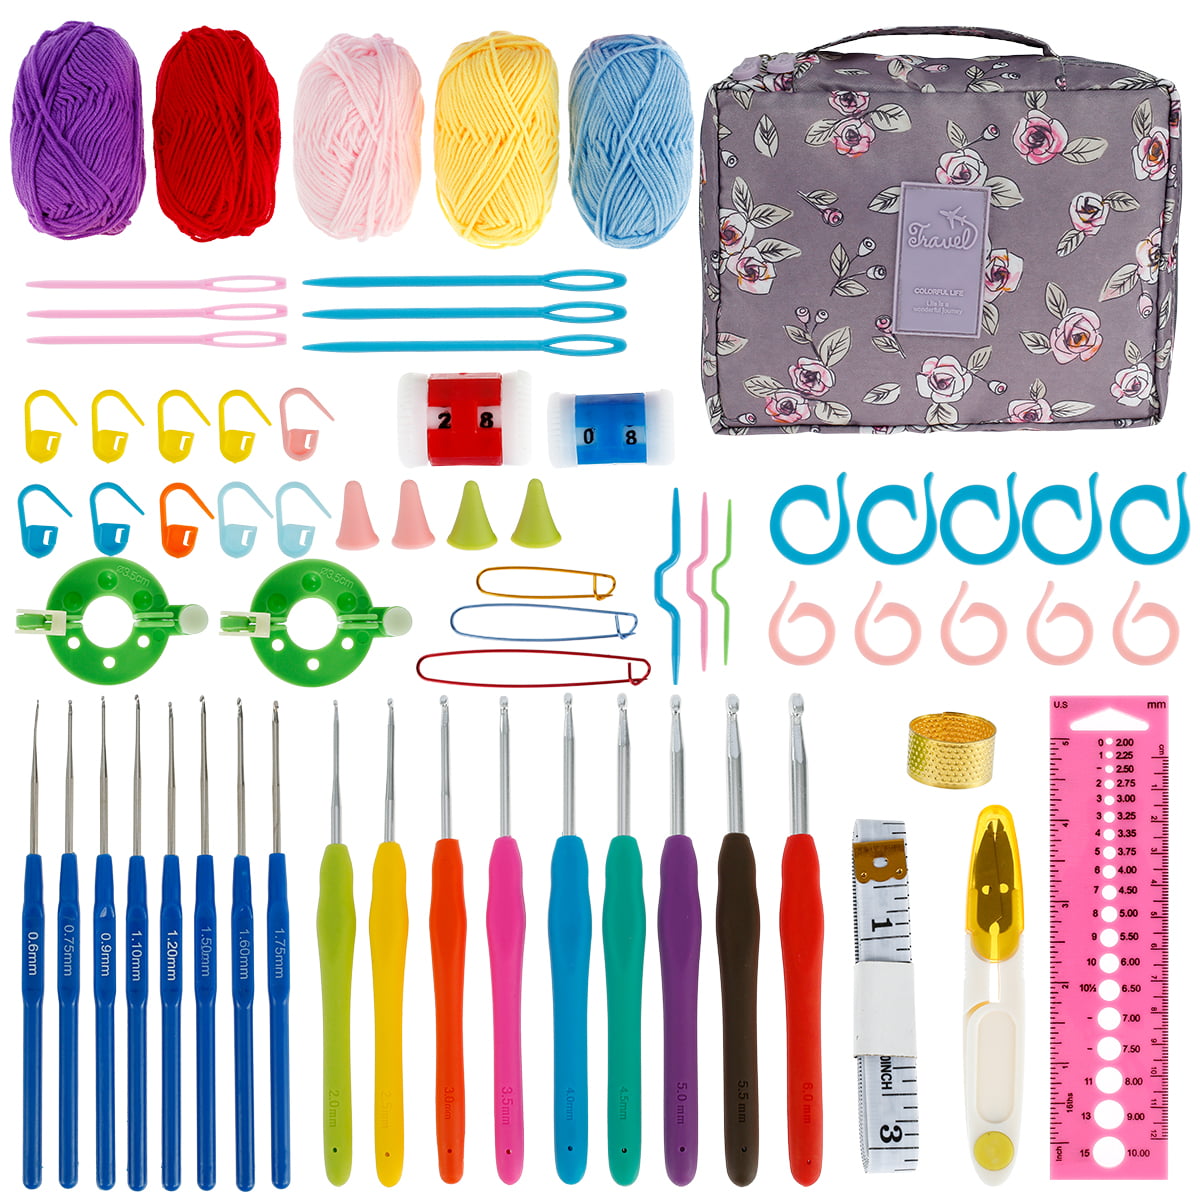 Mamamax Crochet Kits for Beginners,Colorful Crochet Hook Set with  Storage,Accessories Ergonomic Crochet Kit,Starter Pack for Kids Adults,  Beginner,Professionals(Swan Lake) 